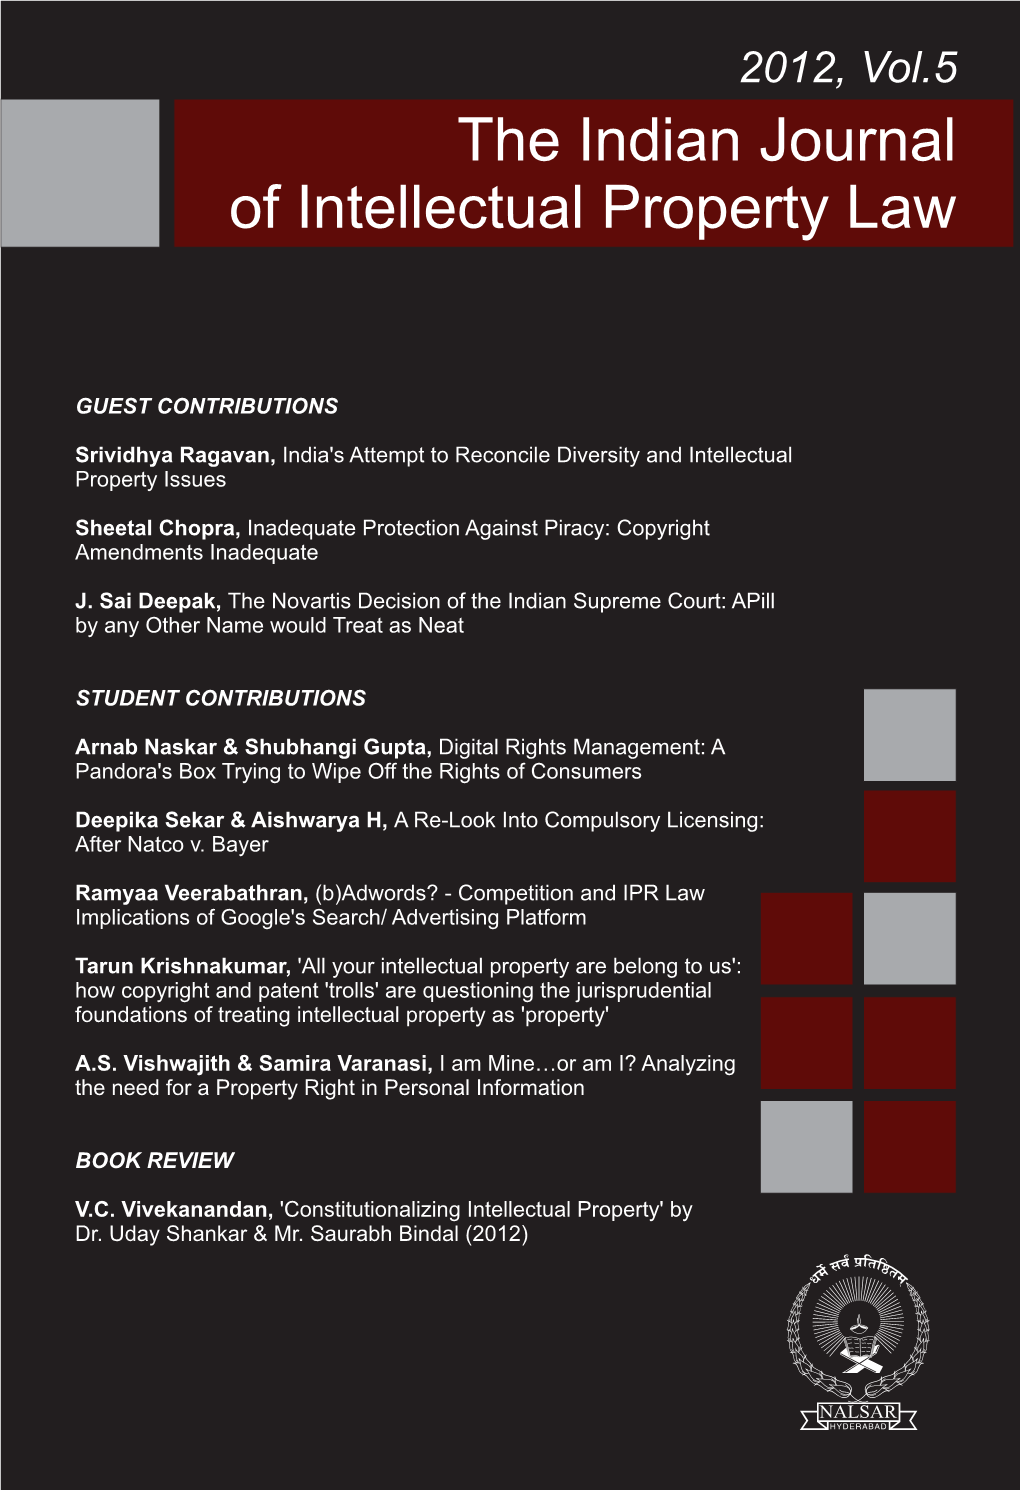 The Indian Journal of Intellectual Property Law